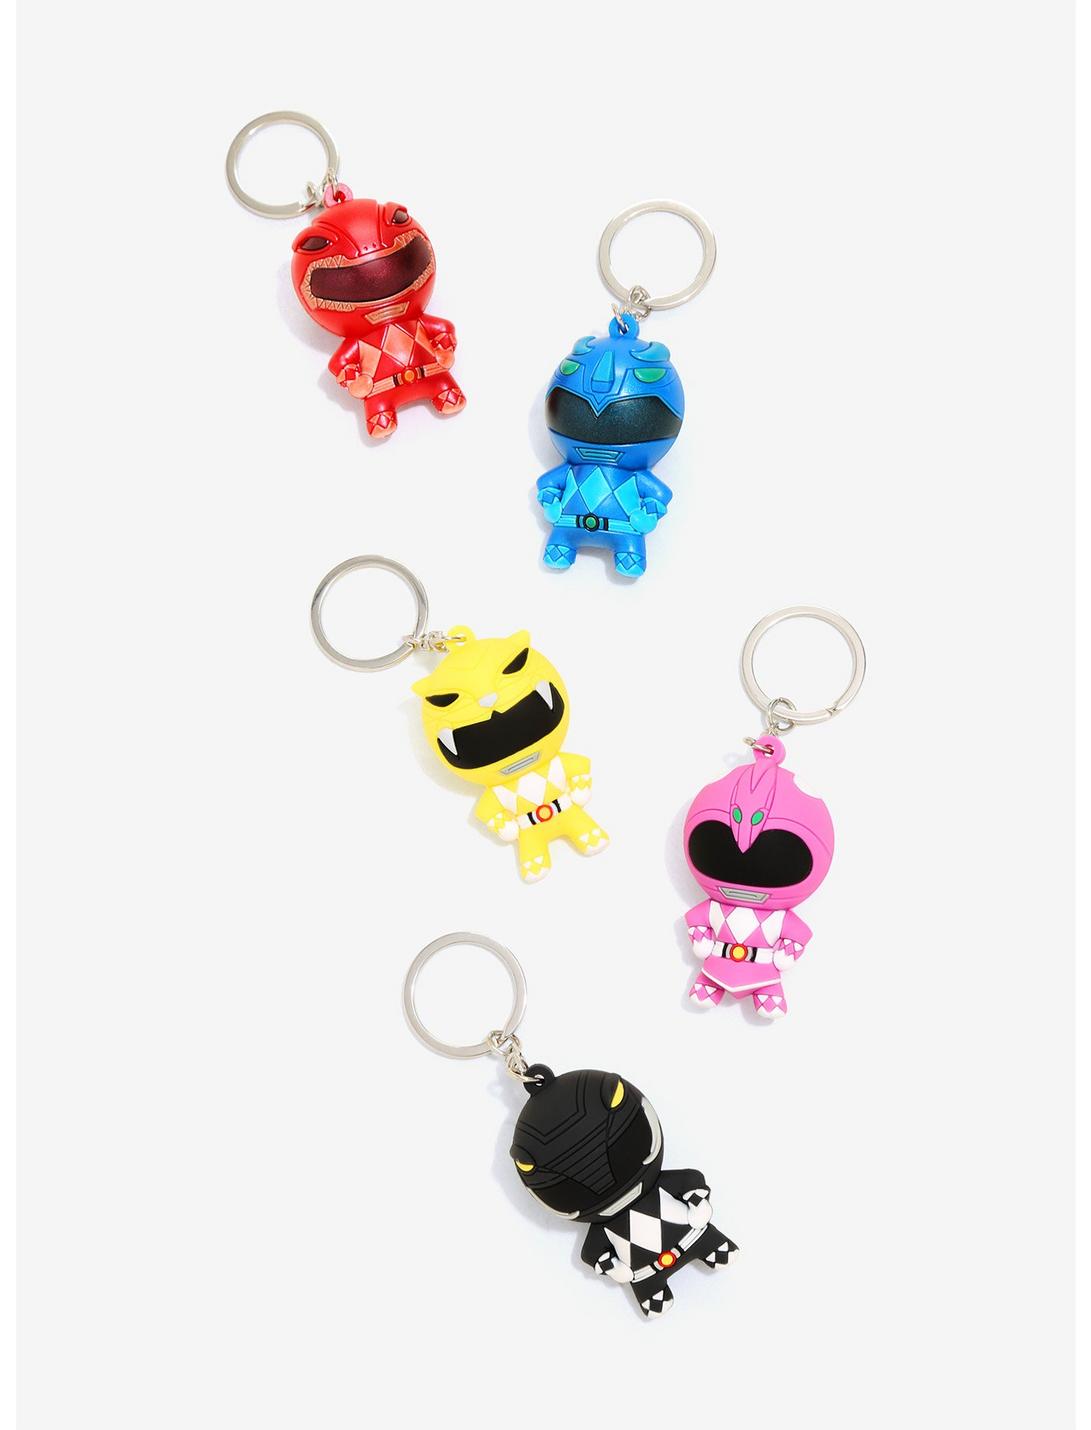 Mighty Morphin Power Rangers Key Chain Set - 2017 Summer Convention Exclusive, , hi-res